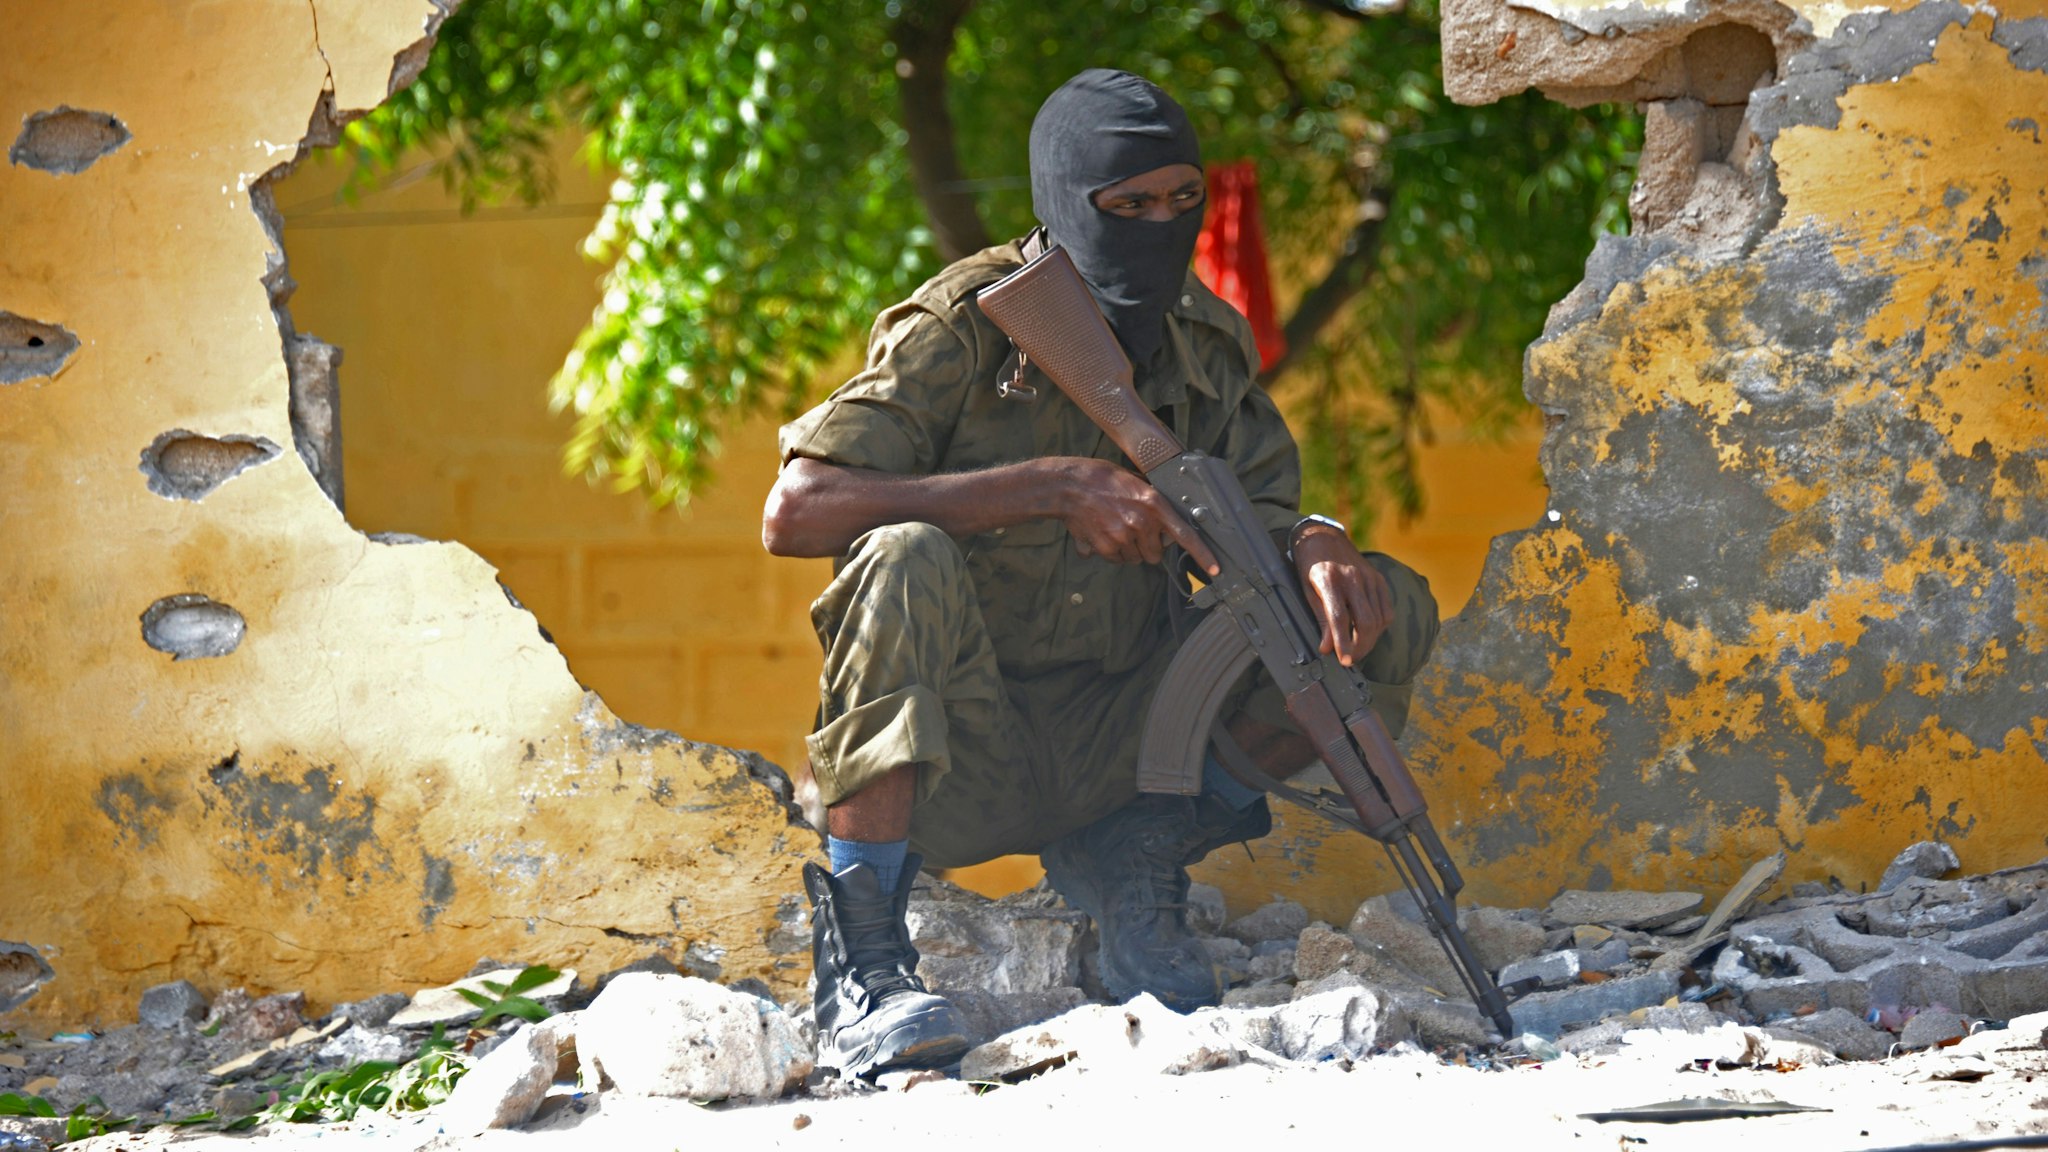 A Somali soldier stands guard next to the site where Al Shebab militants carried out a suicide attack against a military intelligence base in Mogadishu on June 21, 2015. Shebab militants launched a major suicide raid on June 21 against a military intelligence base in the capital Mogadishu, setting off a car bomb before storming inside, security officials said. Somalia's interior ministry said the three attackers were all killed in the raid, and that Somali security forces who fought them suffered no casualties.